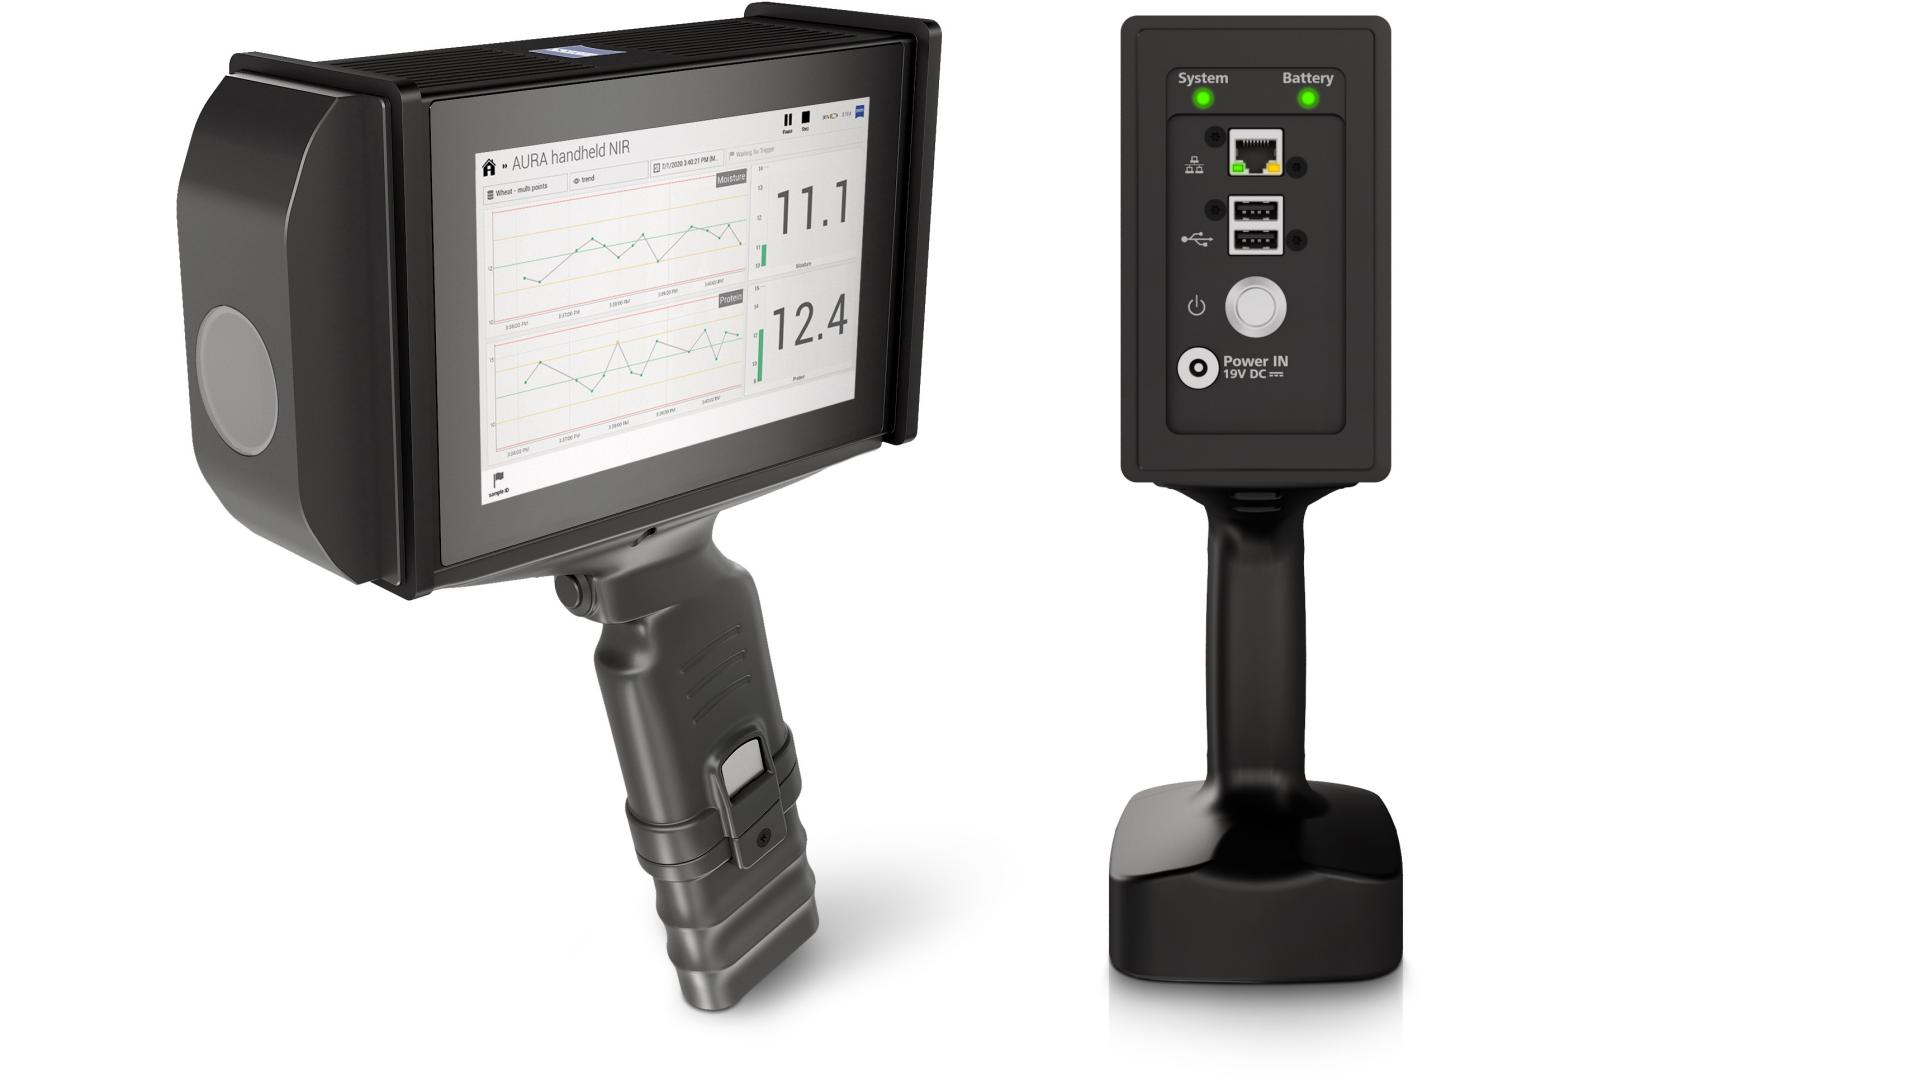 AURA® handheld NIR with detailed description of the components